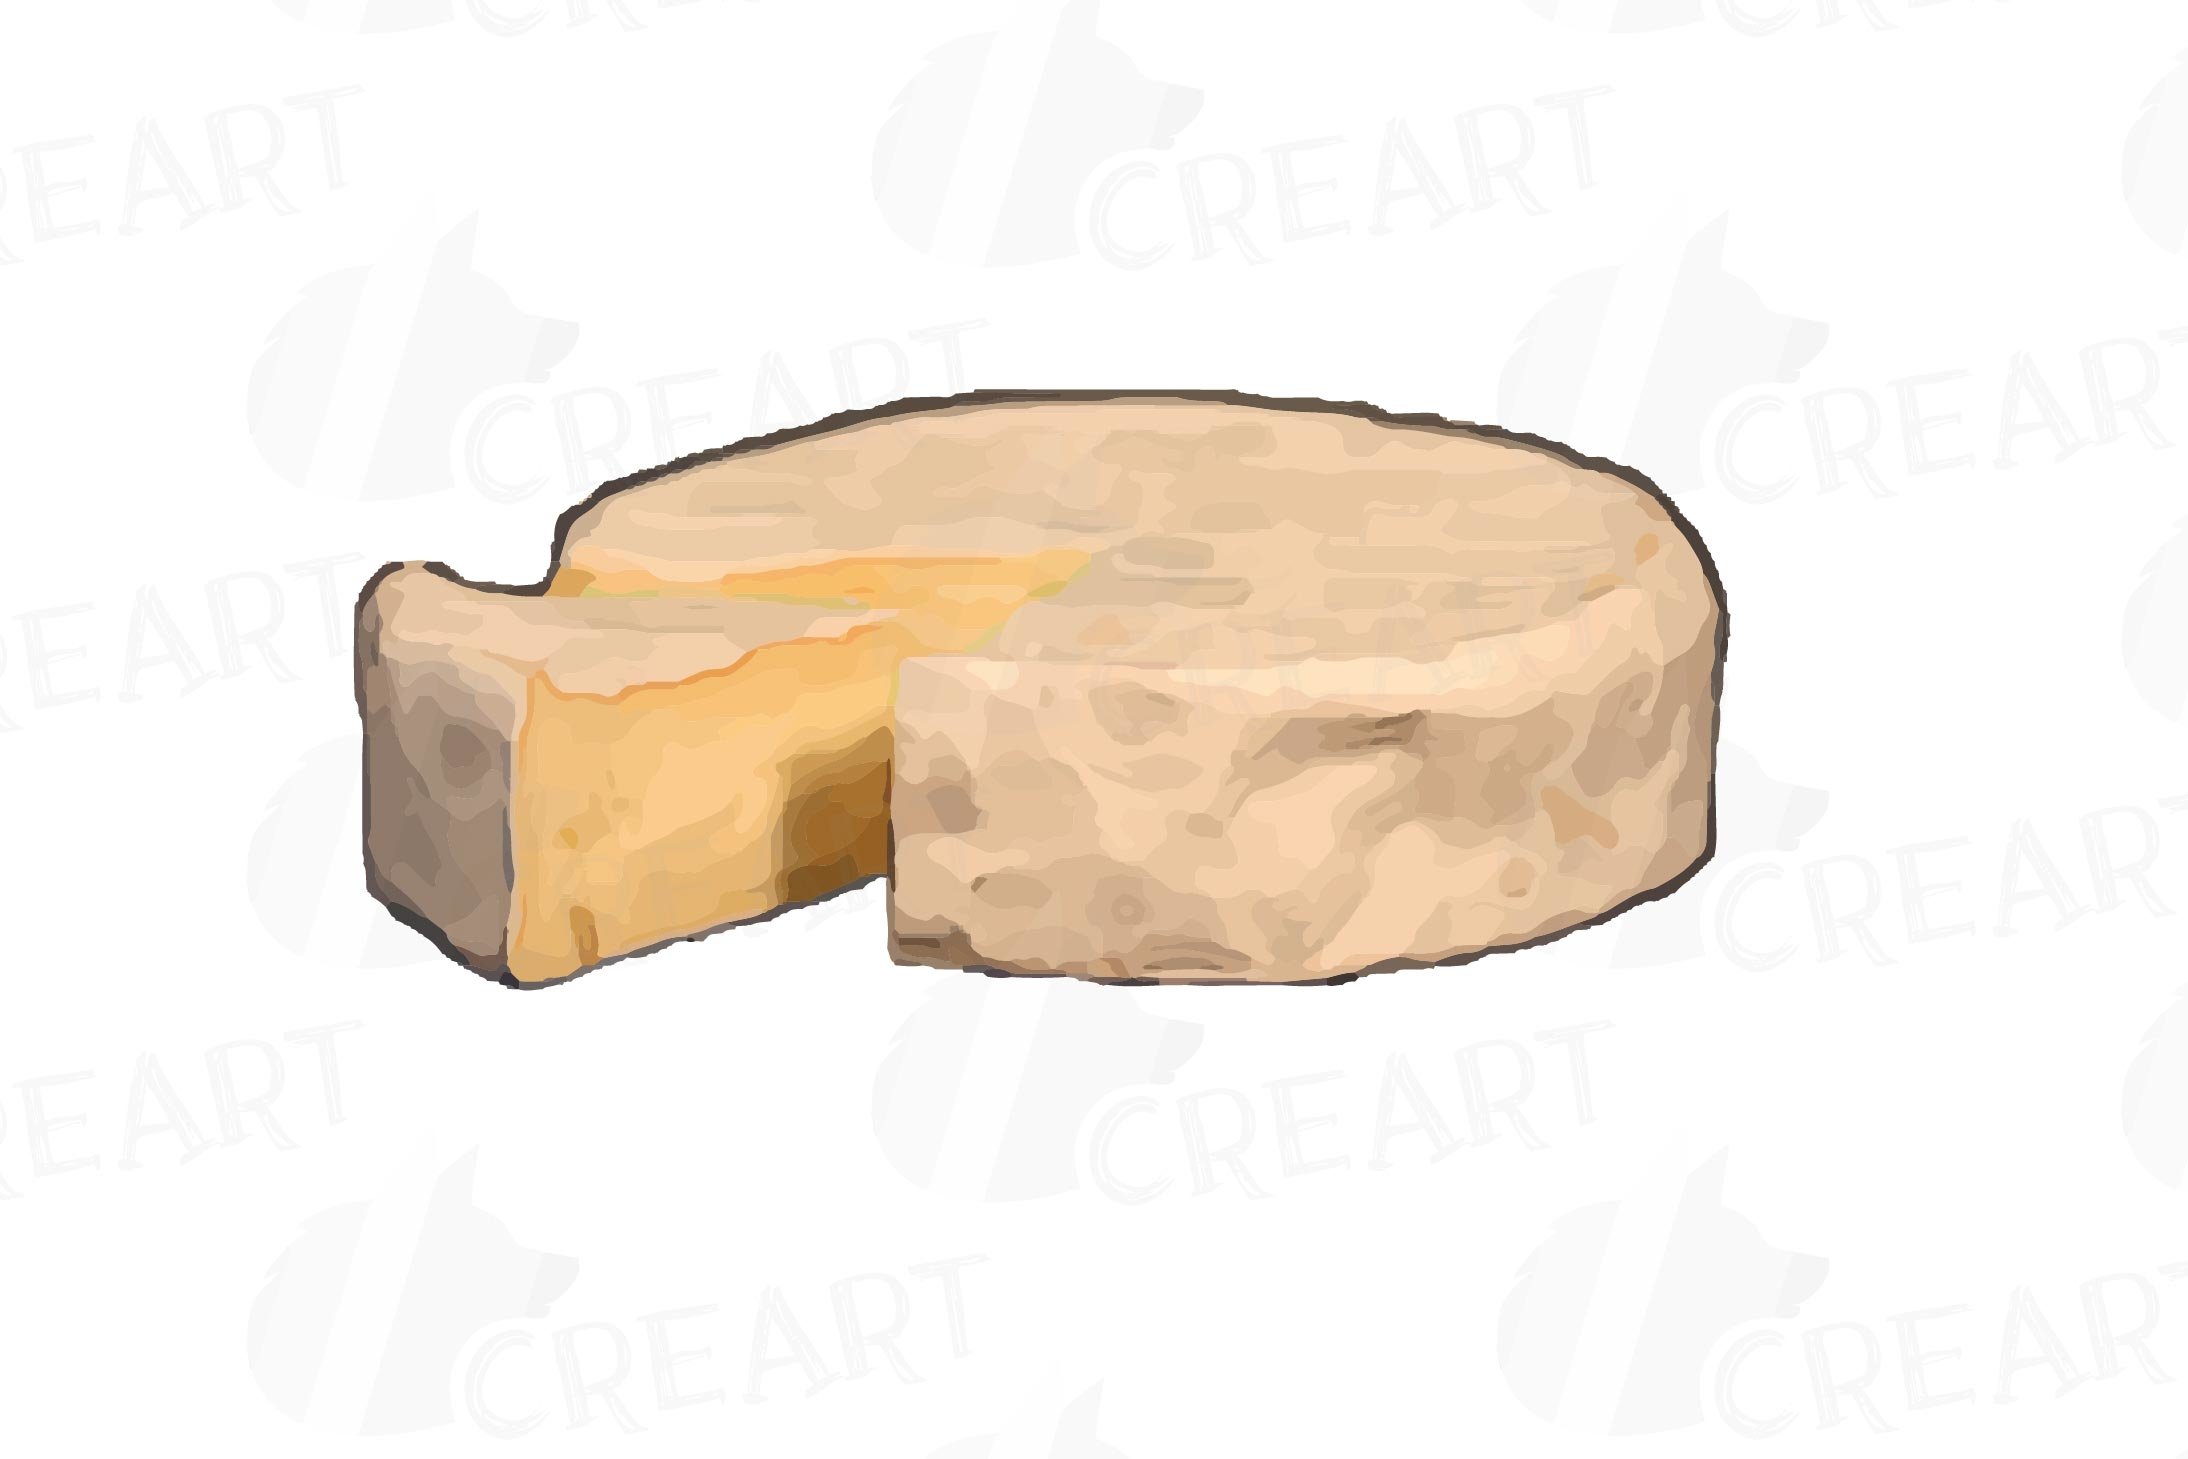 Charming image of hard cheese on a white background.